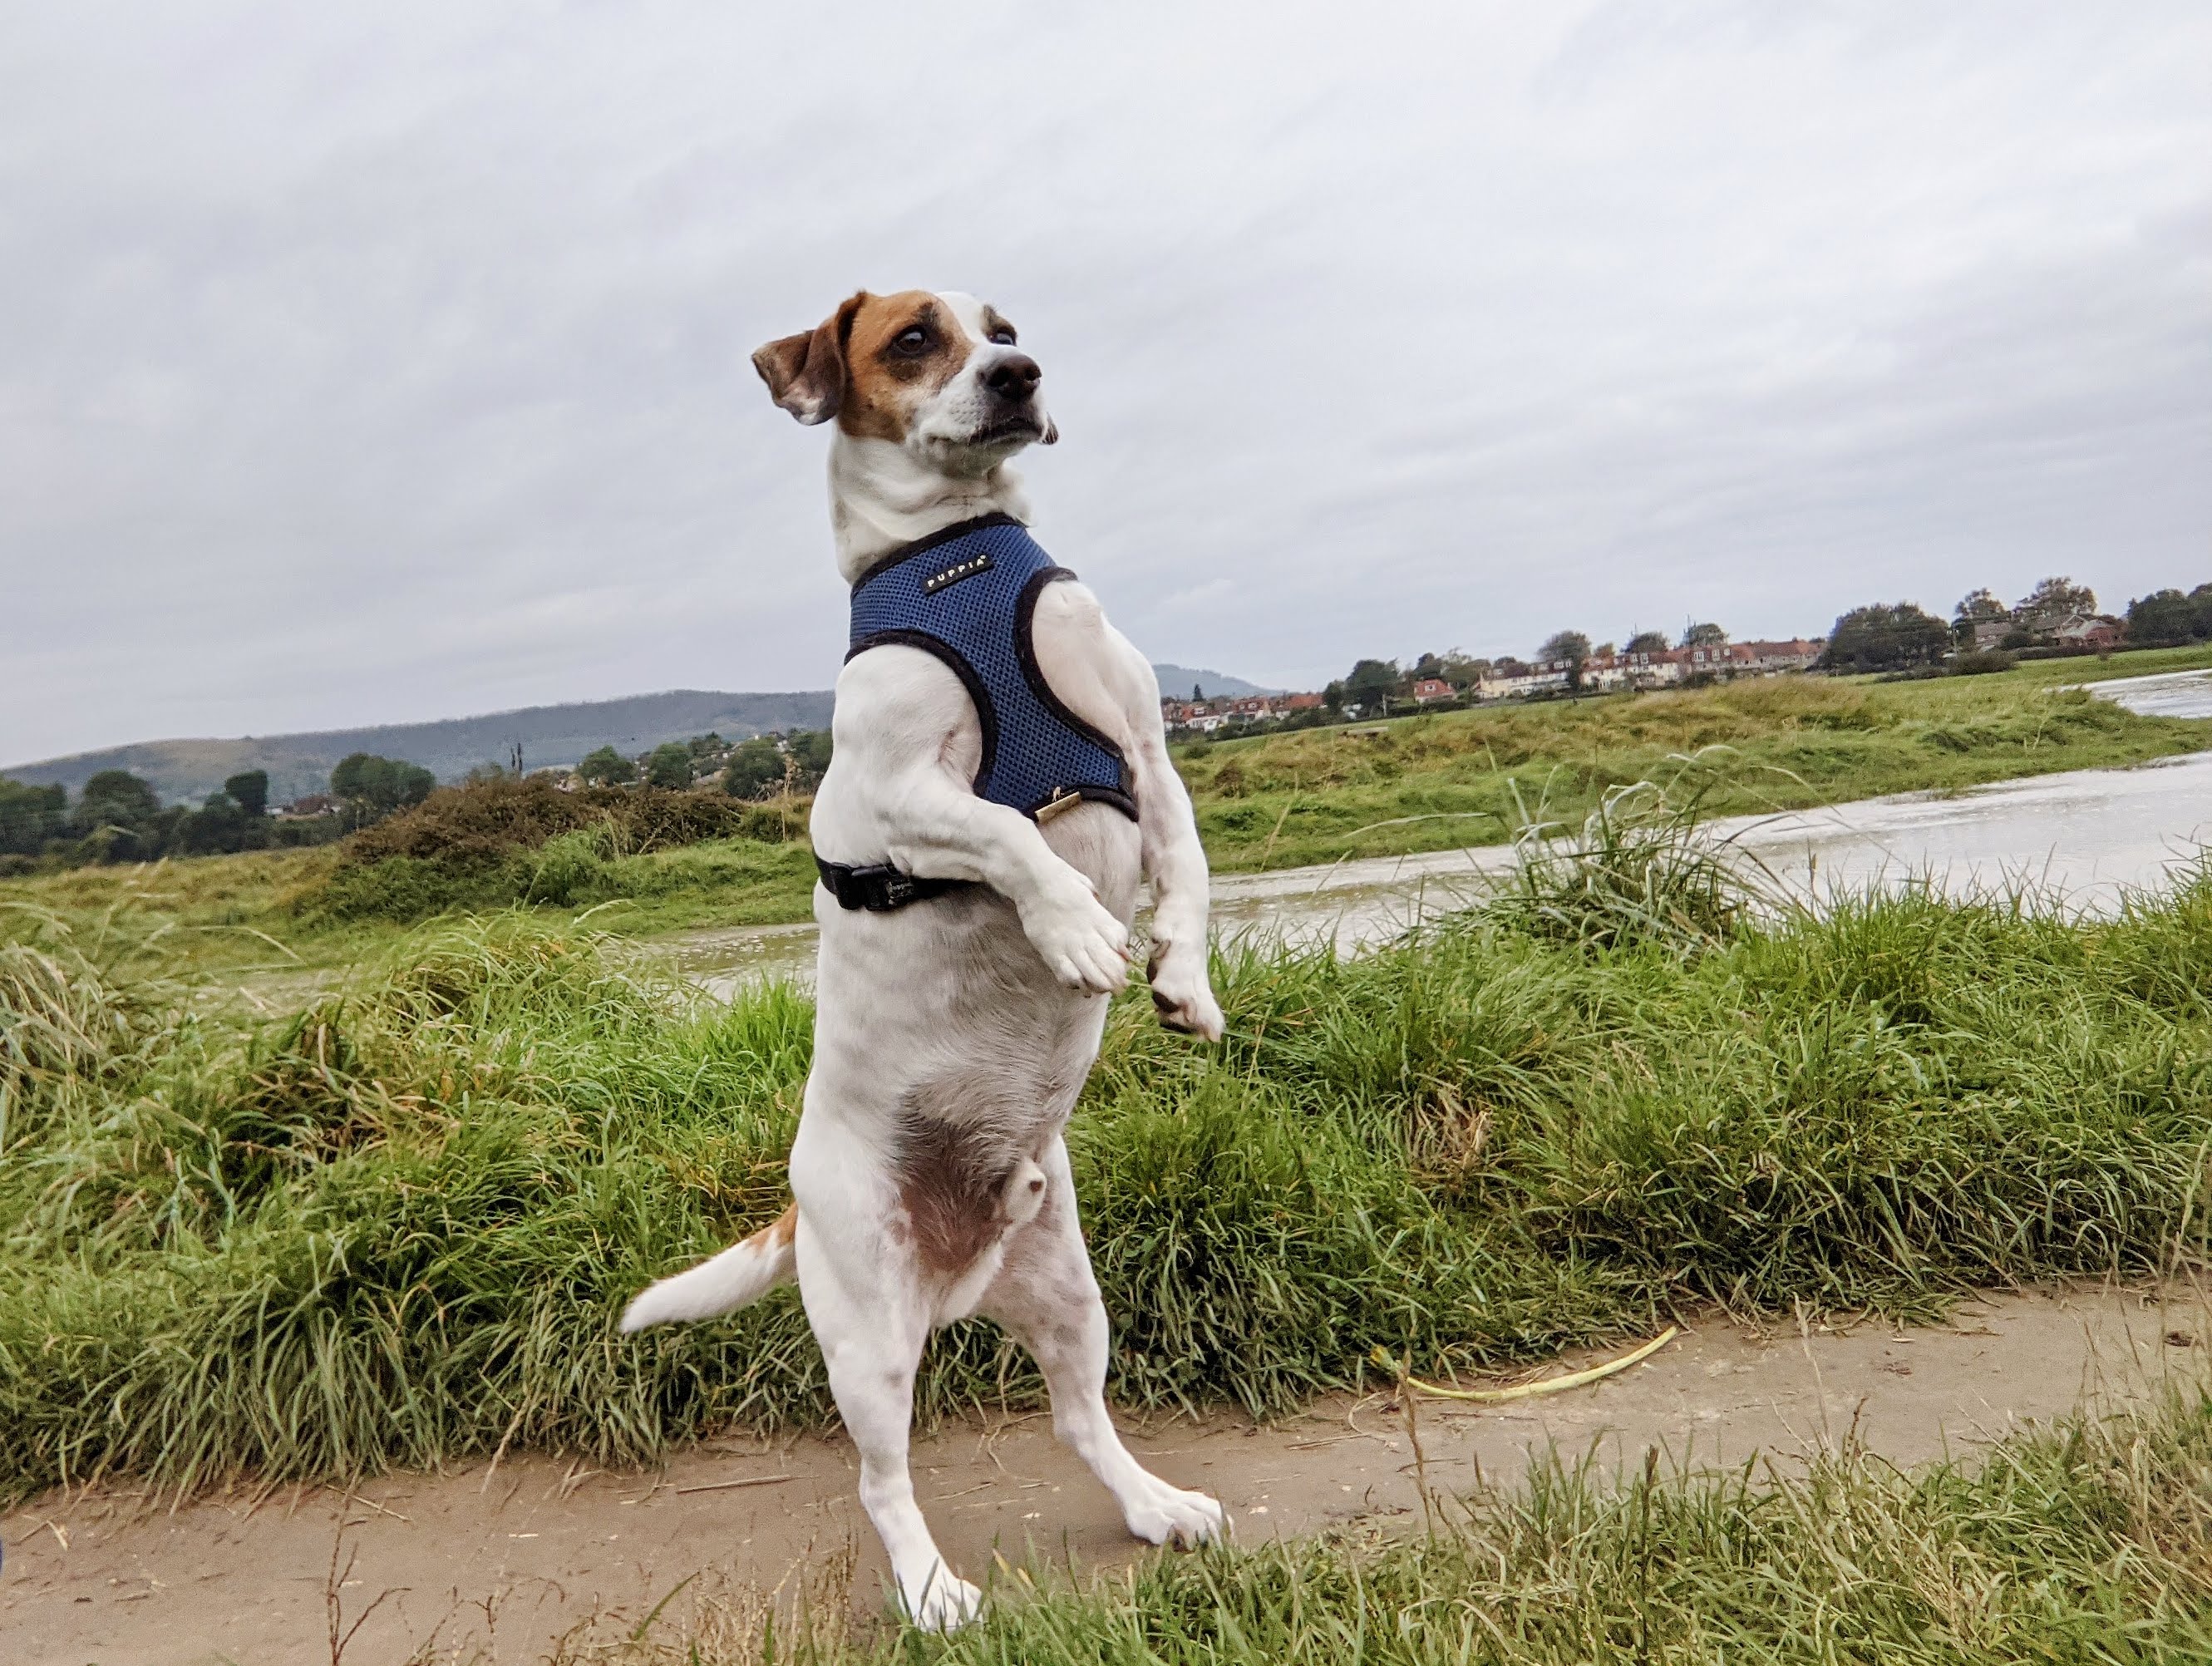 Albie, the Jack Russell cross Dachshund, standing on his hind legs with a river behind him.